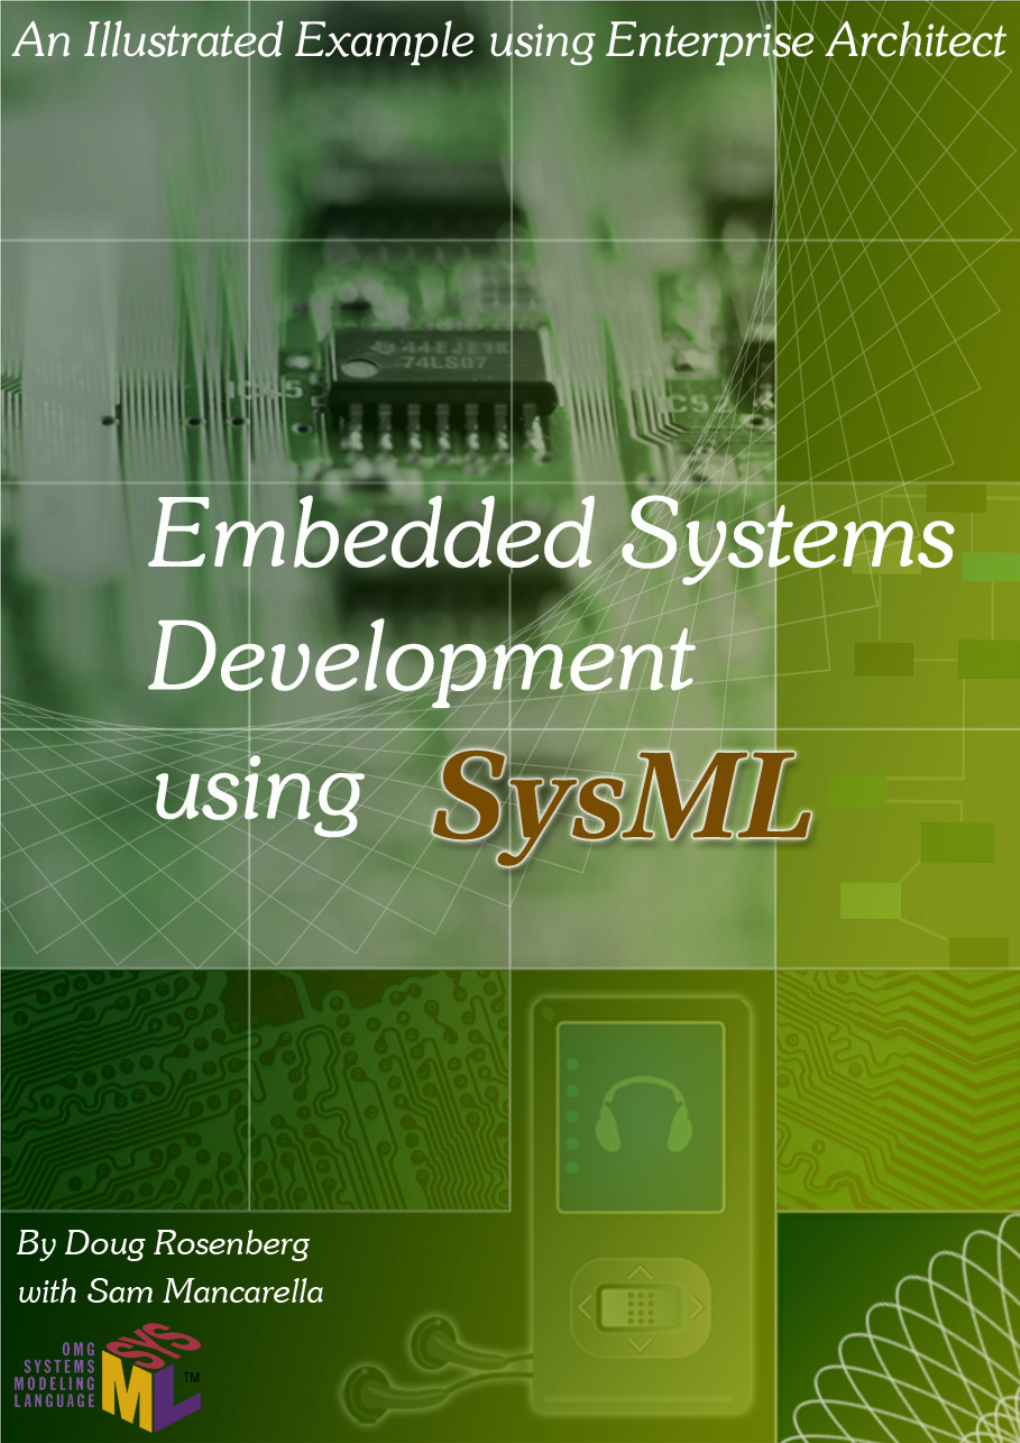 Embedded Systems Development Using Sysml and the Enterprise Architect System Engineering Edition